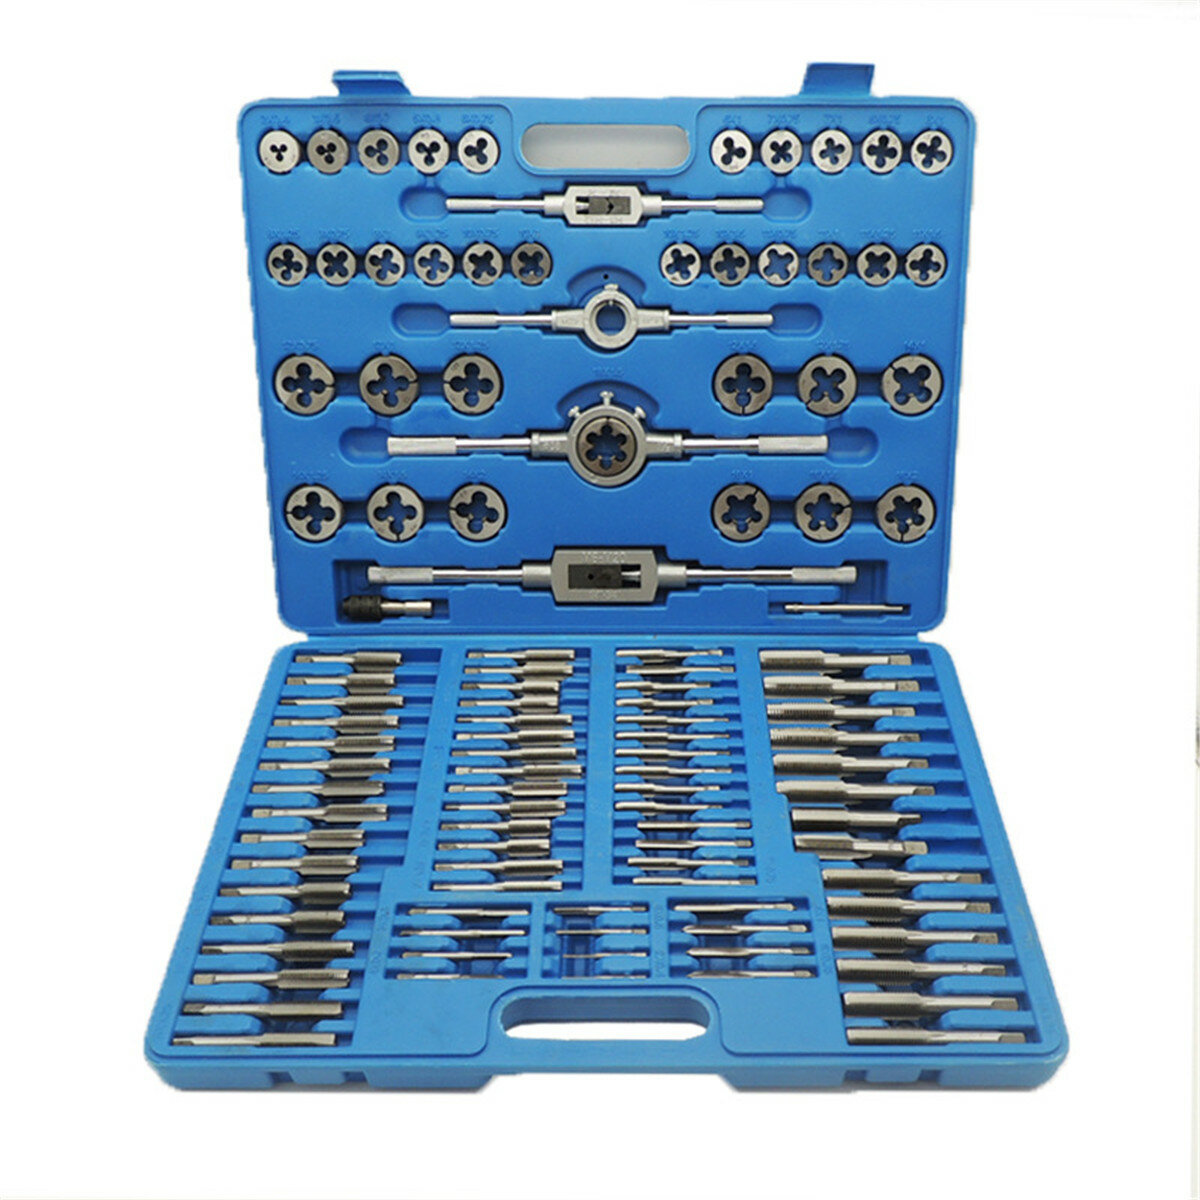 

110Pcs Metric Tap And Die Metric Tapping Threading Chasing Tap and Die Set with Storage Case